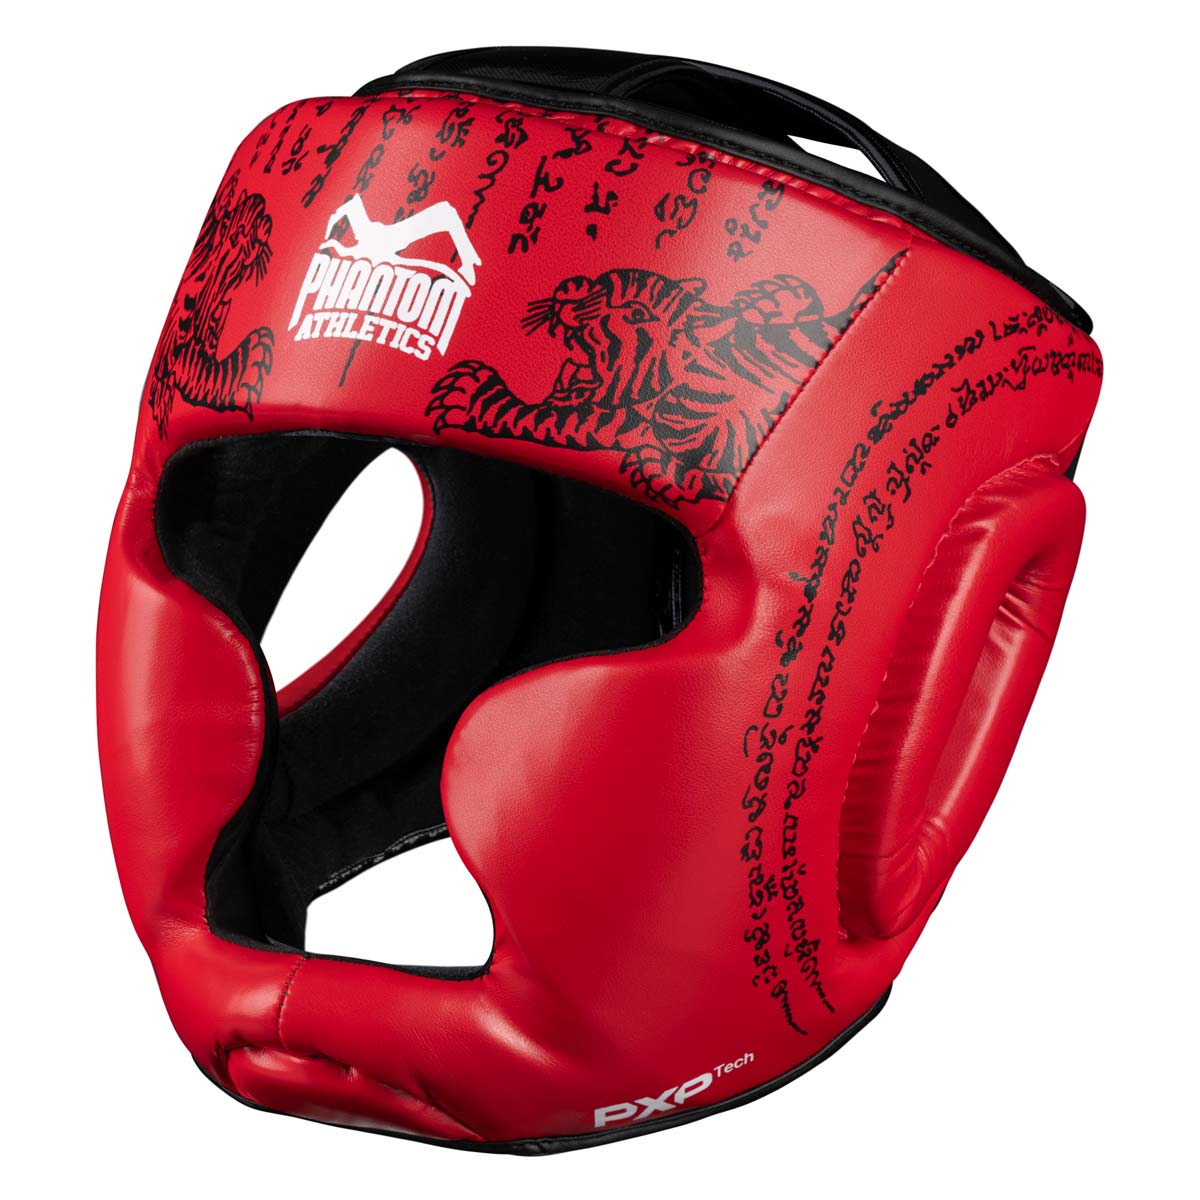 Phantom Muay Thai head protection for Thai boxing and MMA sparring, competition and training. In the traditional Sak Yant design and the color red.